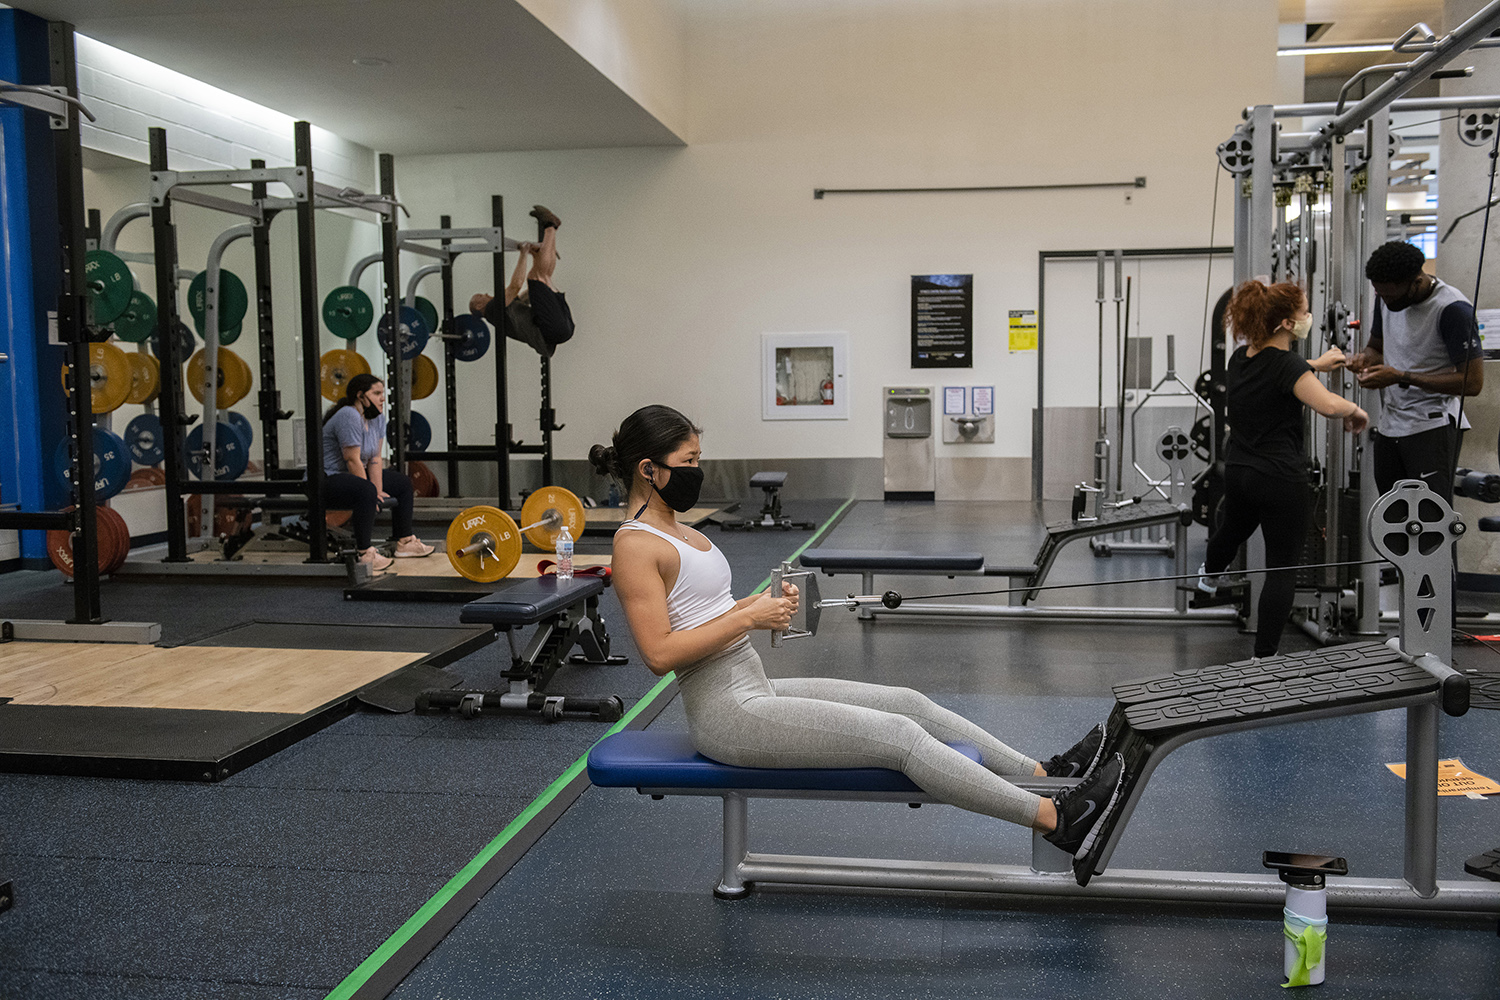 A female student working out in the gym with a mask on.